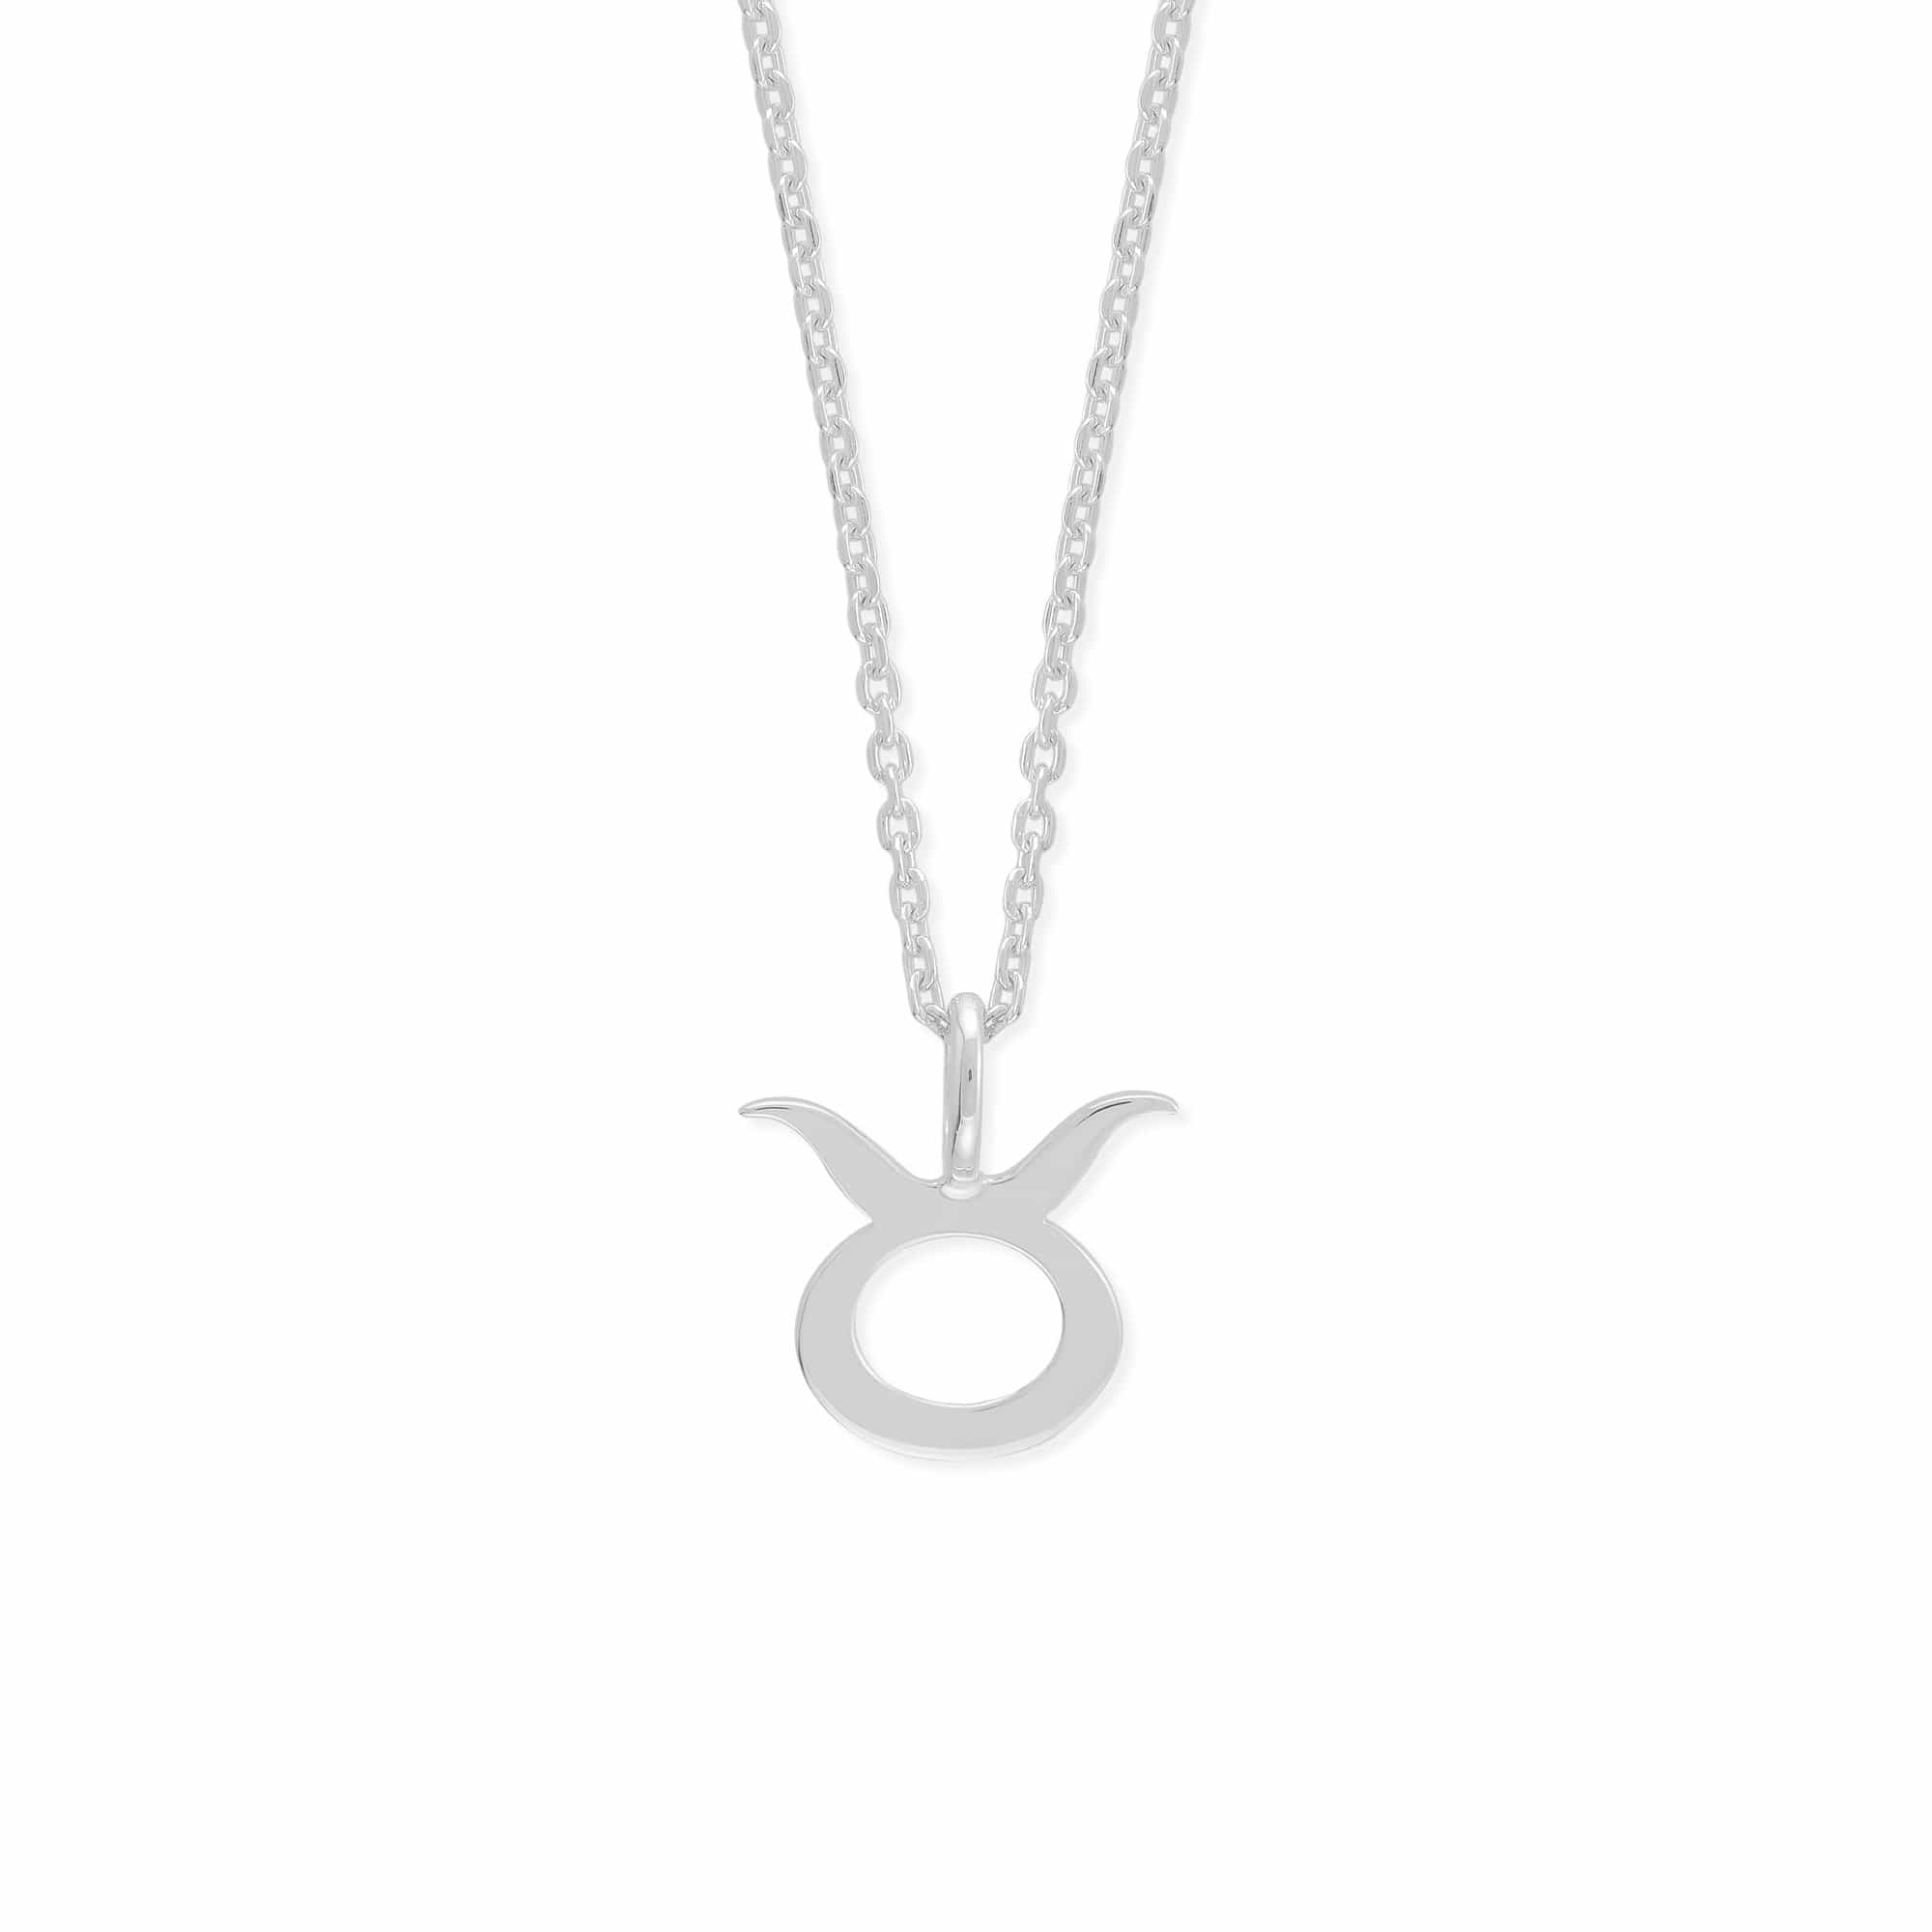 Boma Jewelry Necklaces Sterling Silver / Taurus Zodiac Necklace